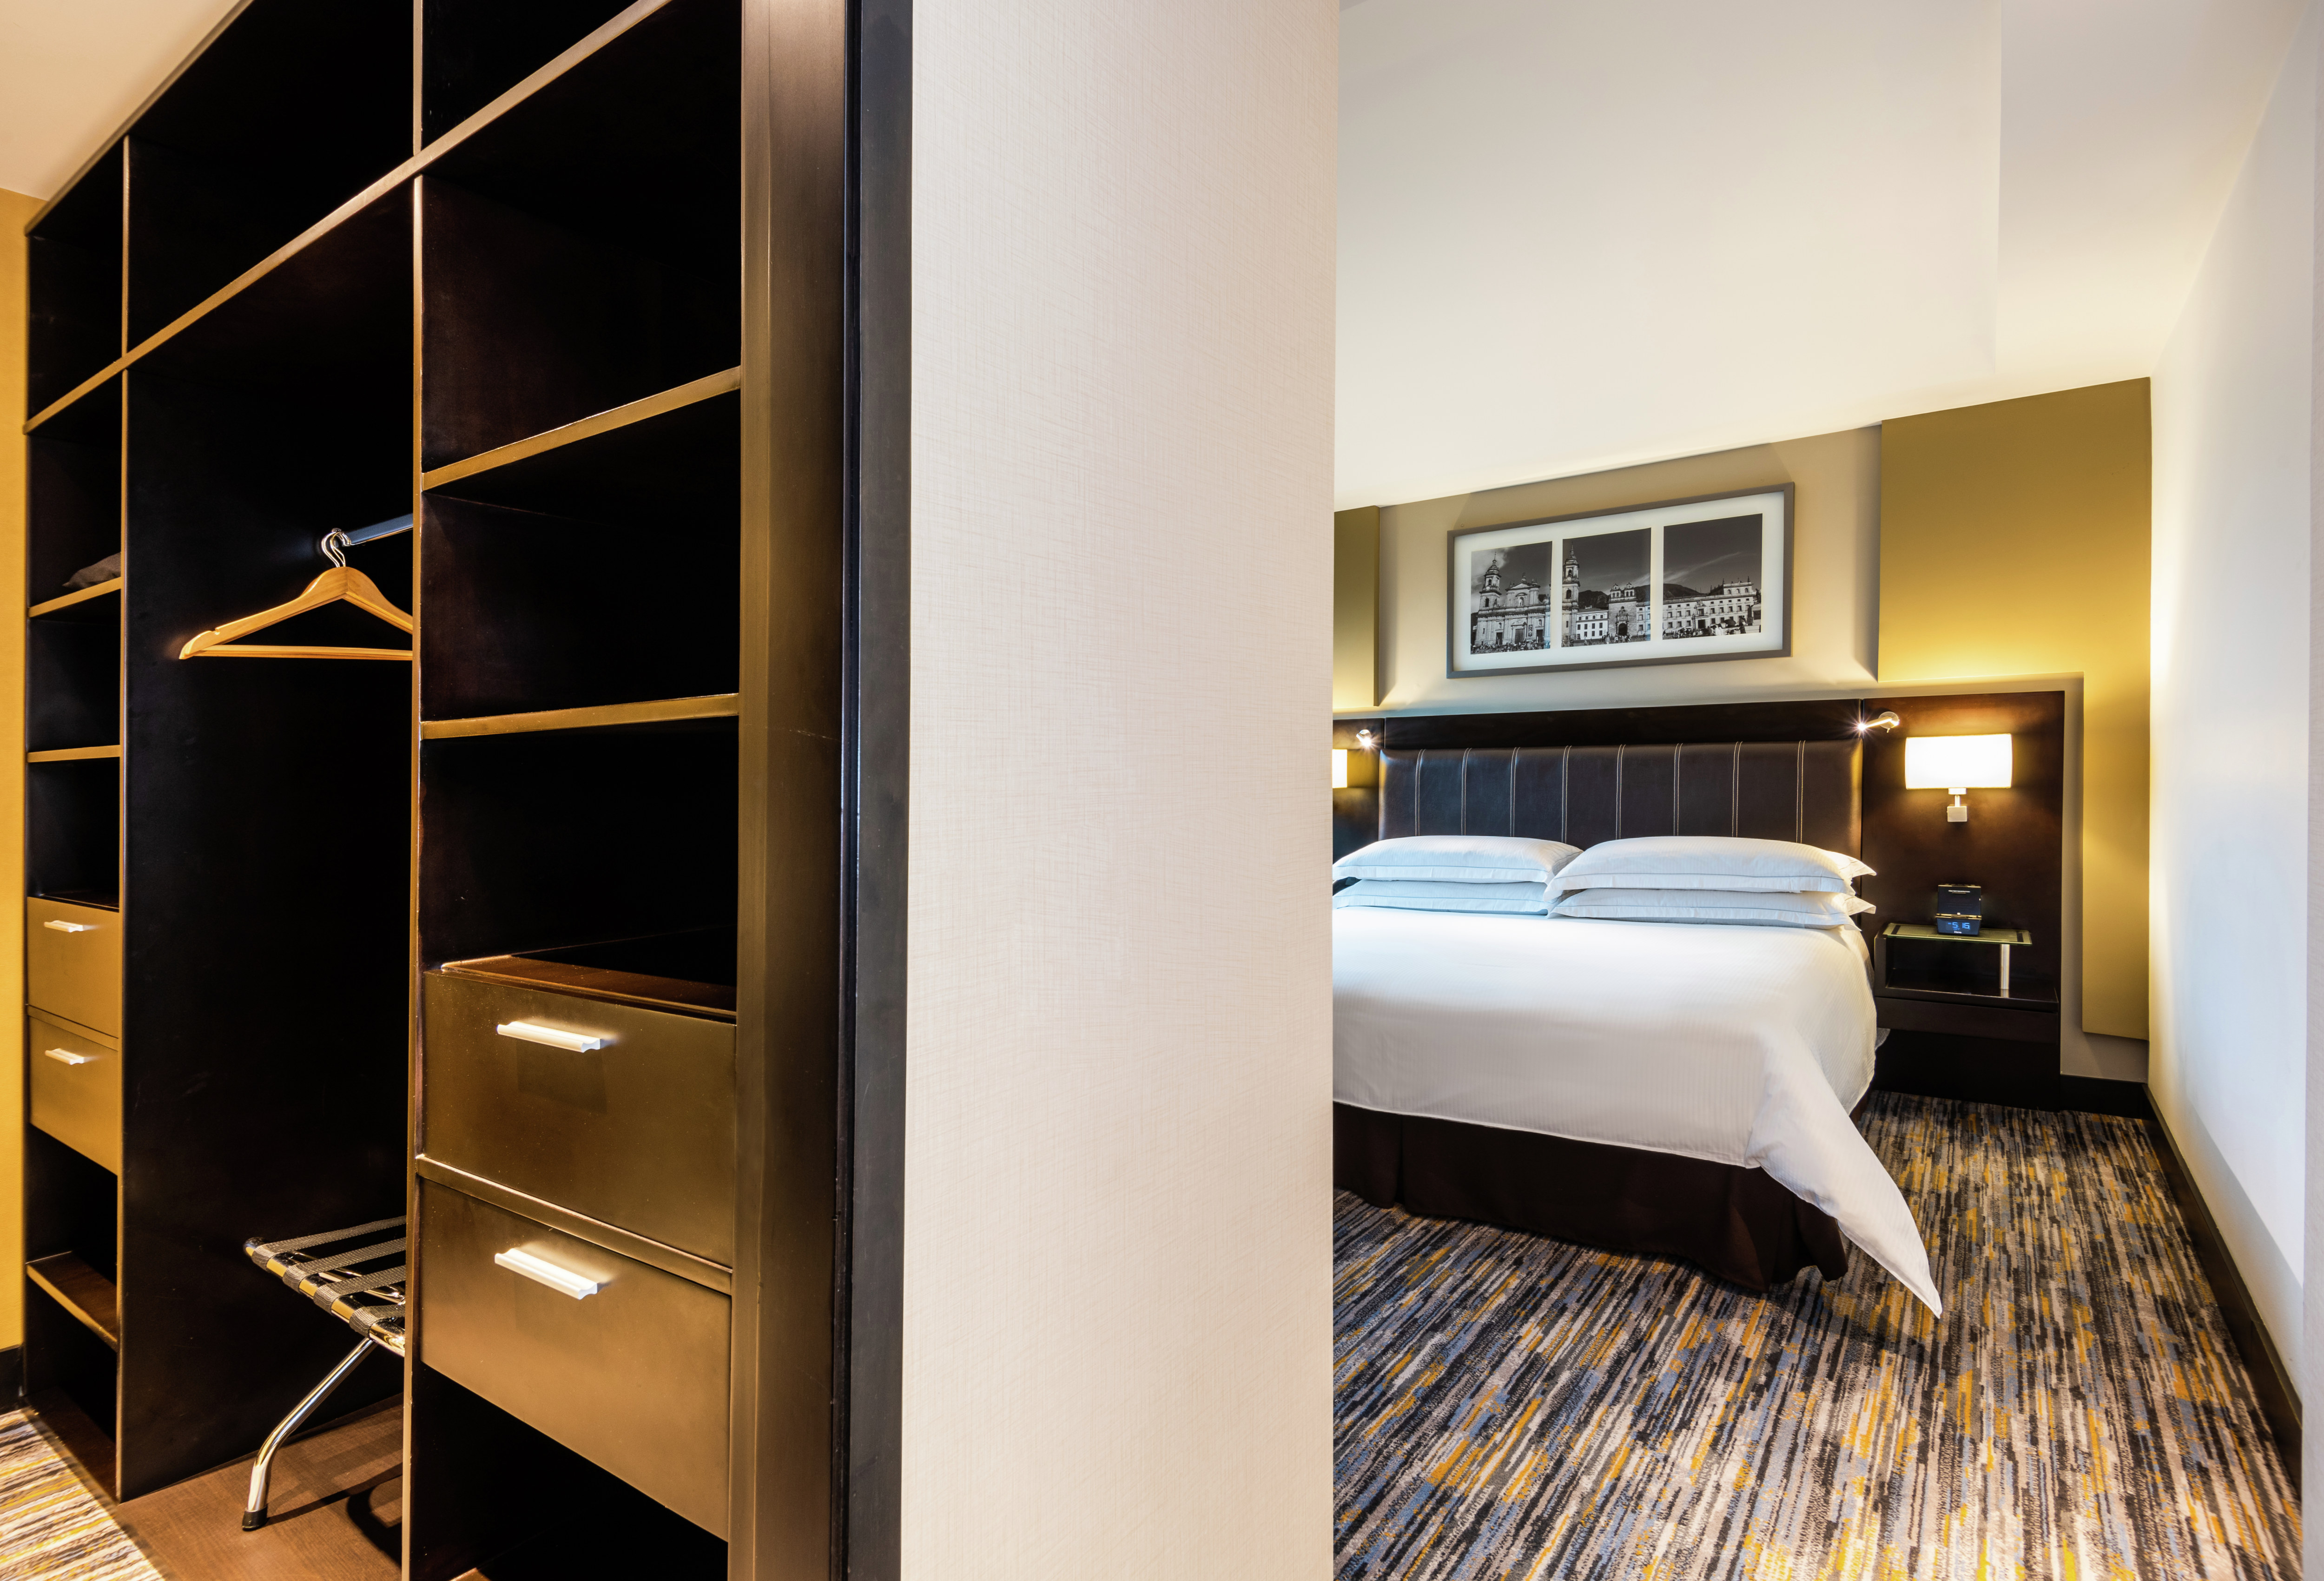 View of King Suite Bed and Closet Area